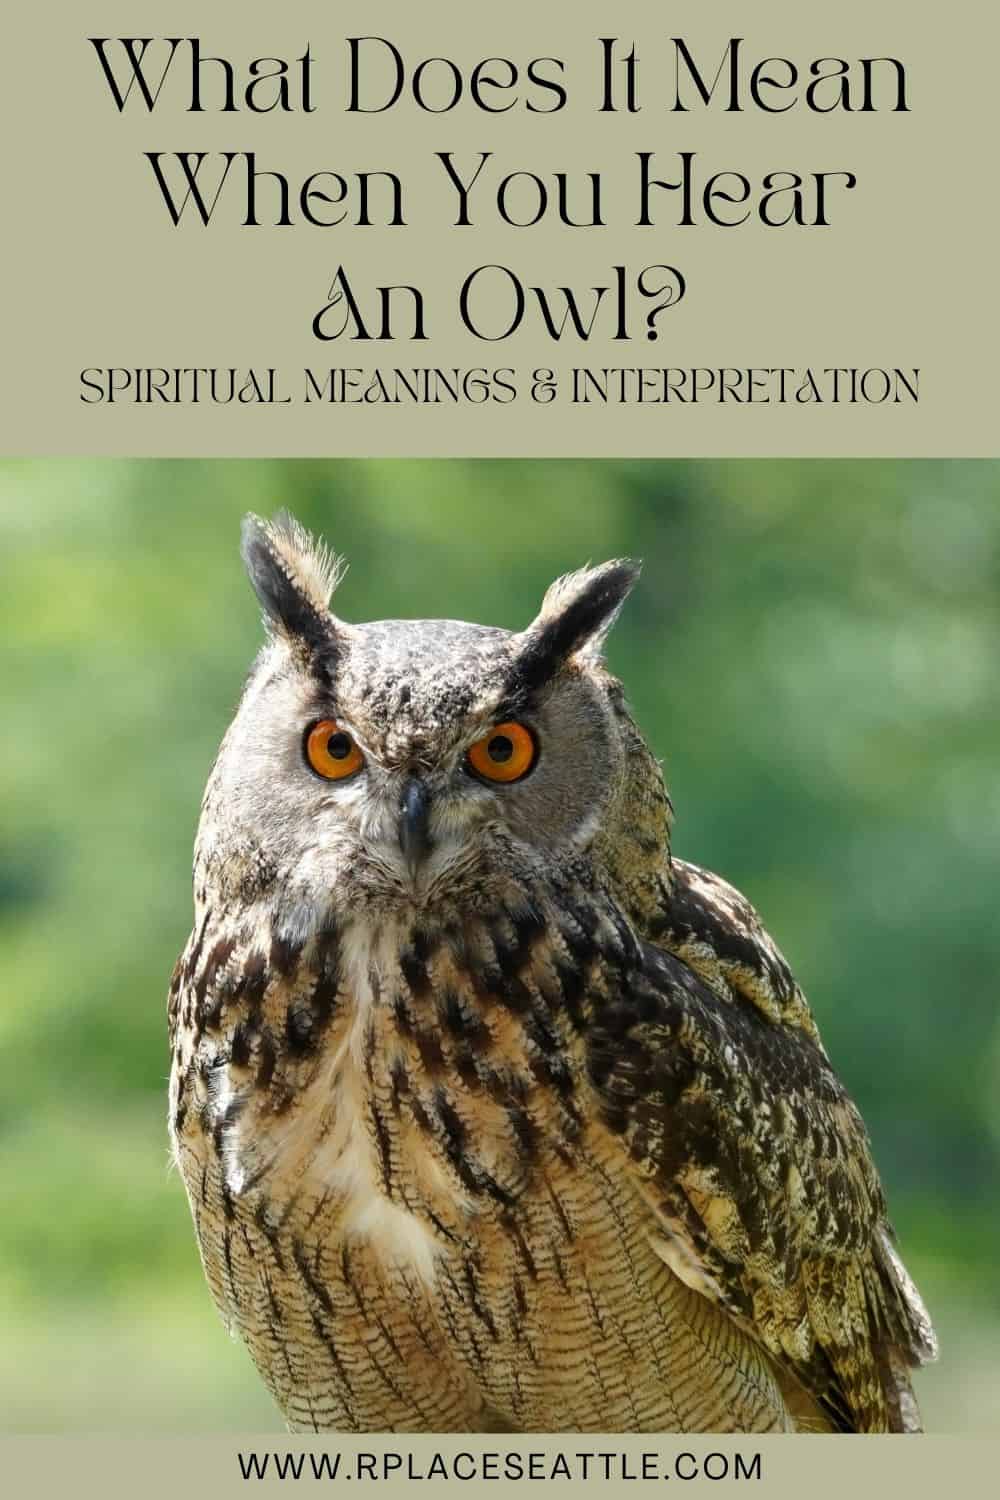 What Does It Mean When You Hear An Owl (Spiritual Meanings & Interpretation)v